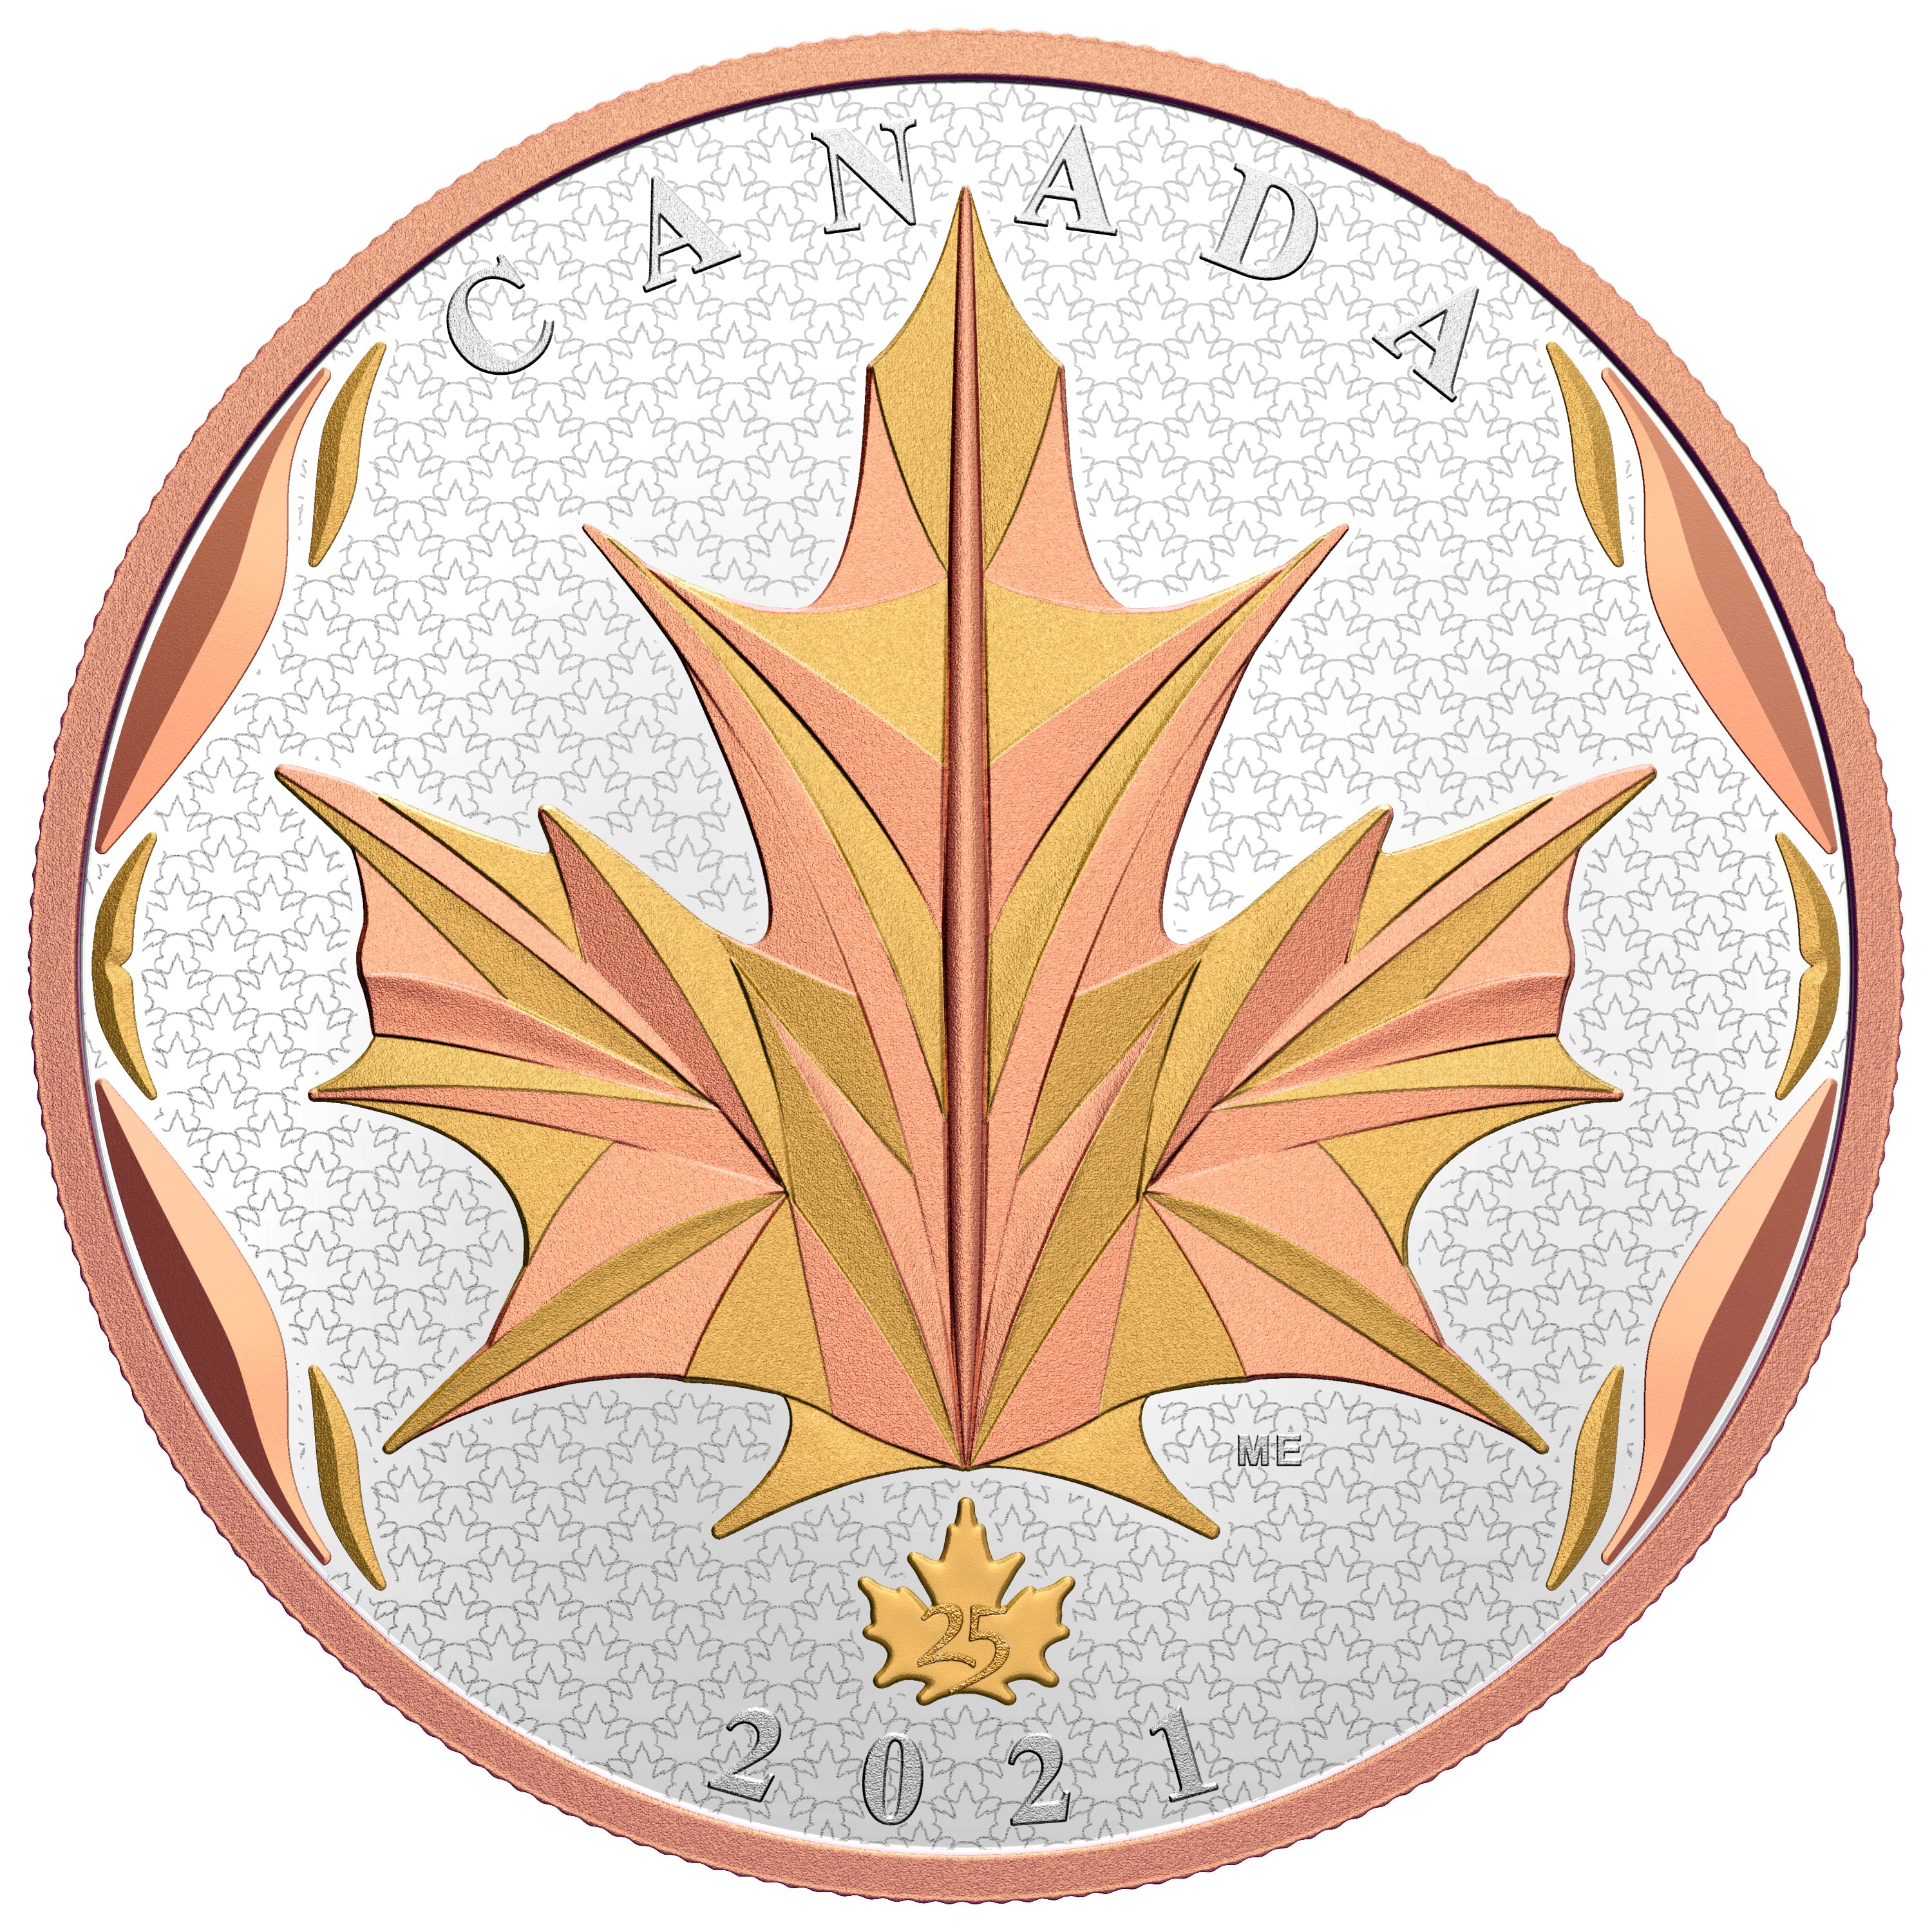 MAPLE LEAVES IN MOTION 5 Oz Silver Coin $50 Canada 2021